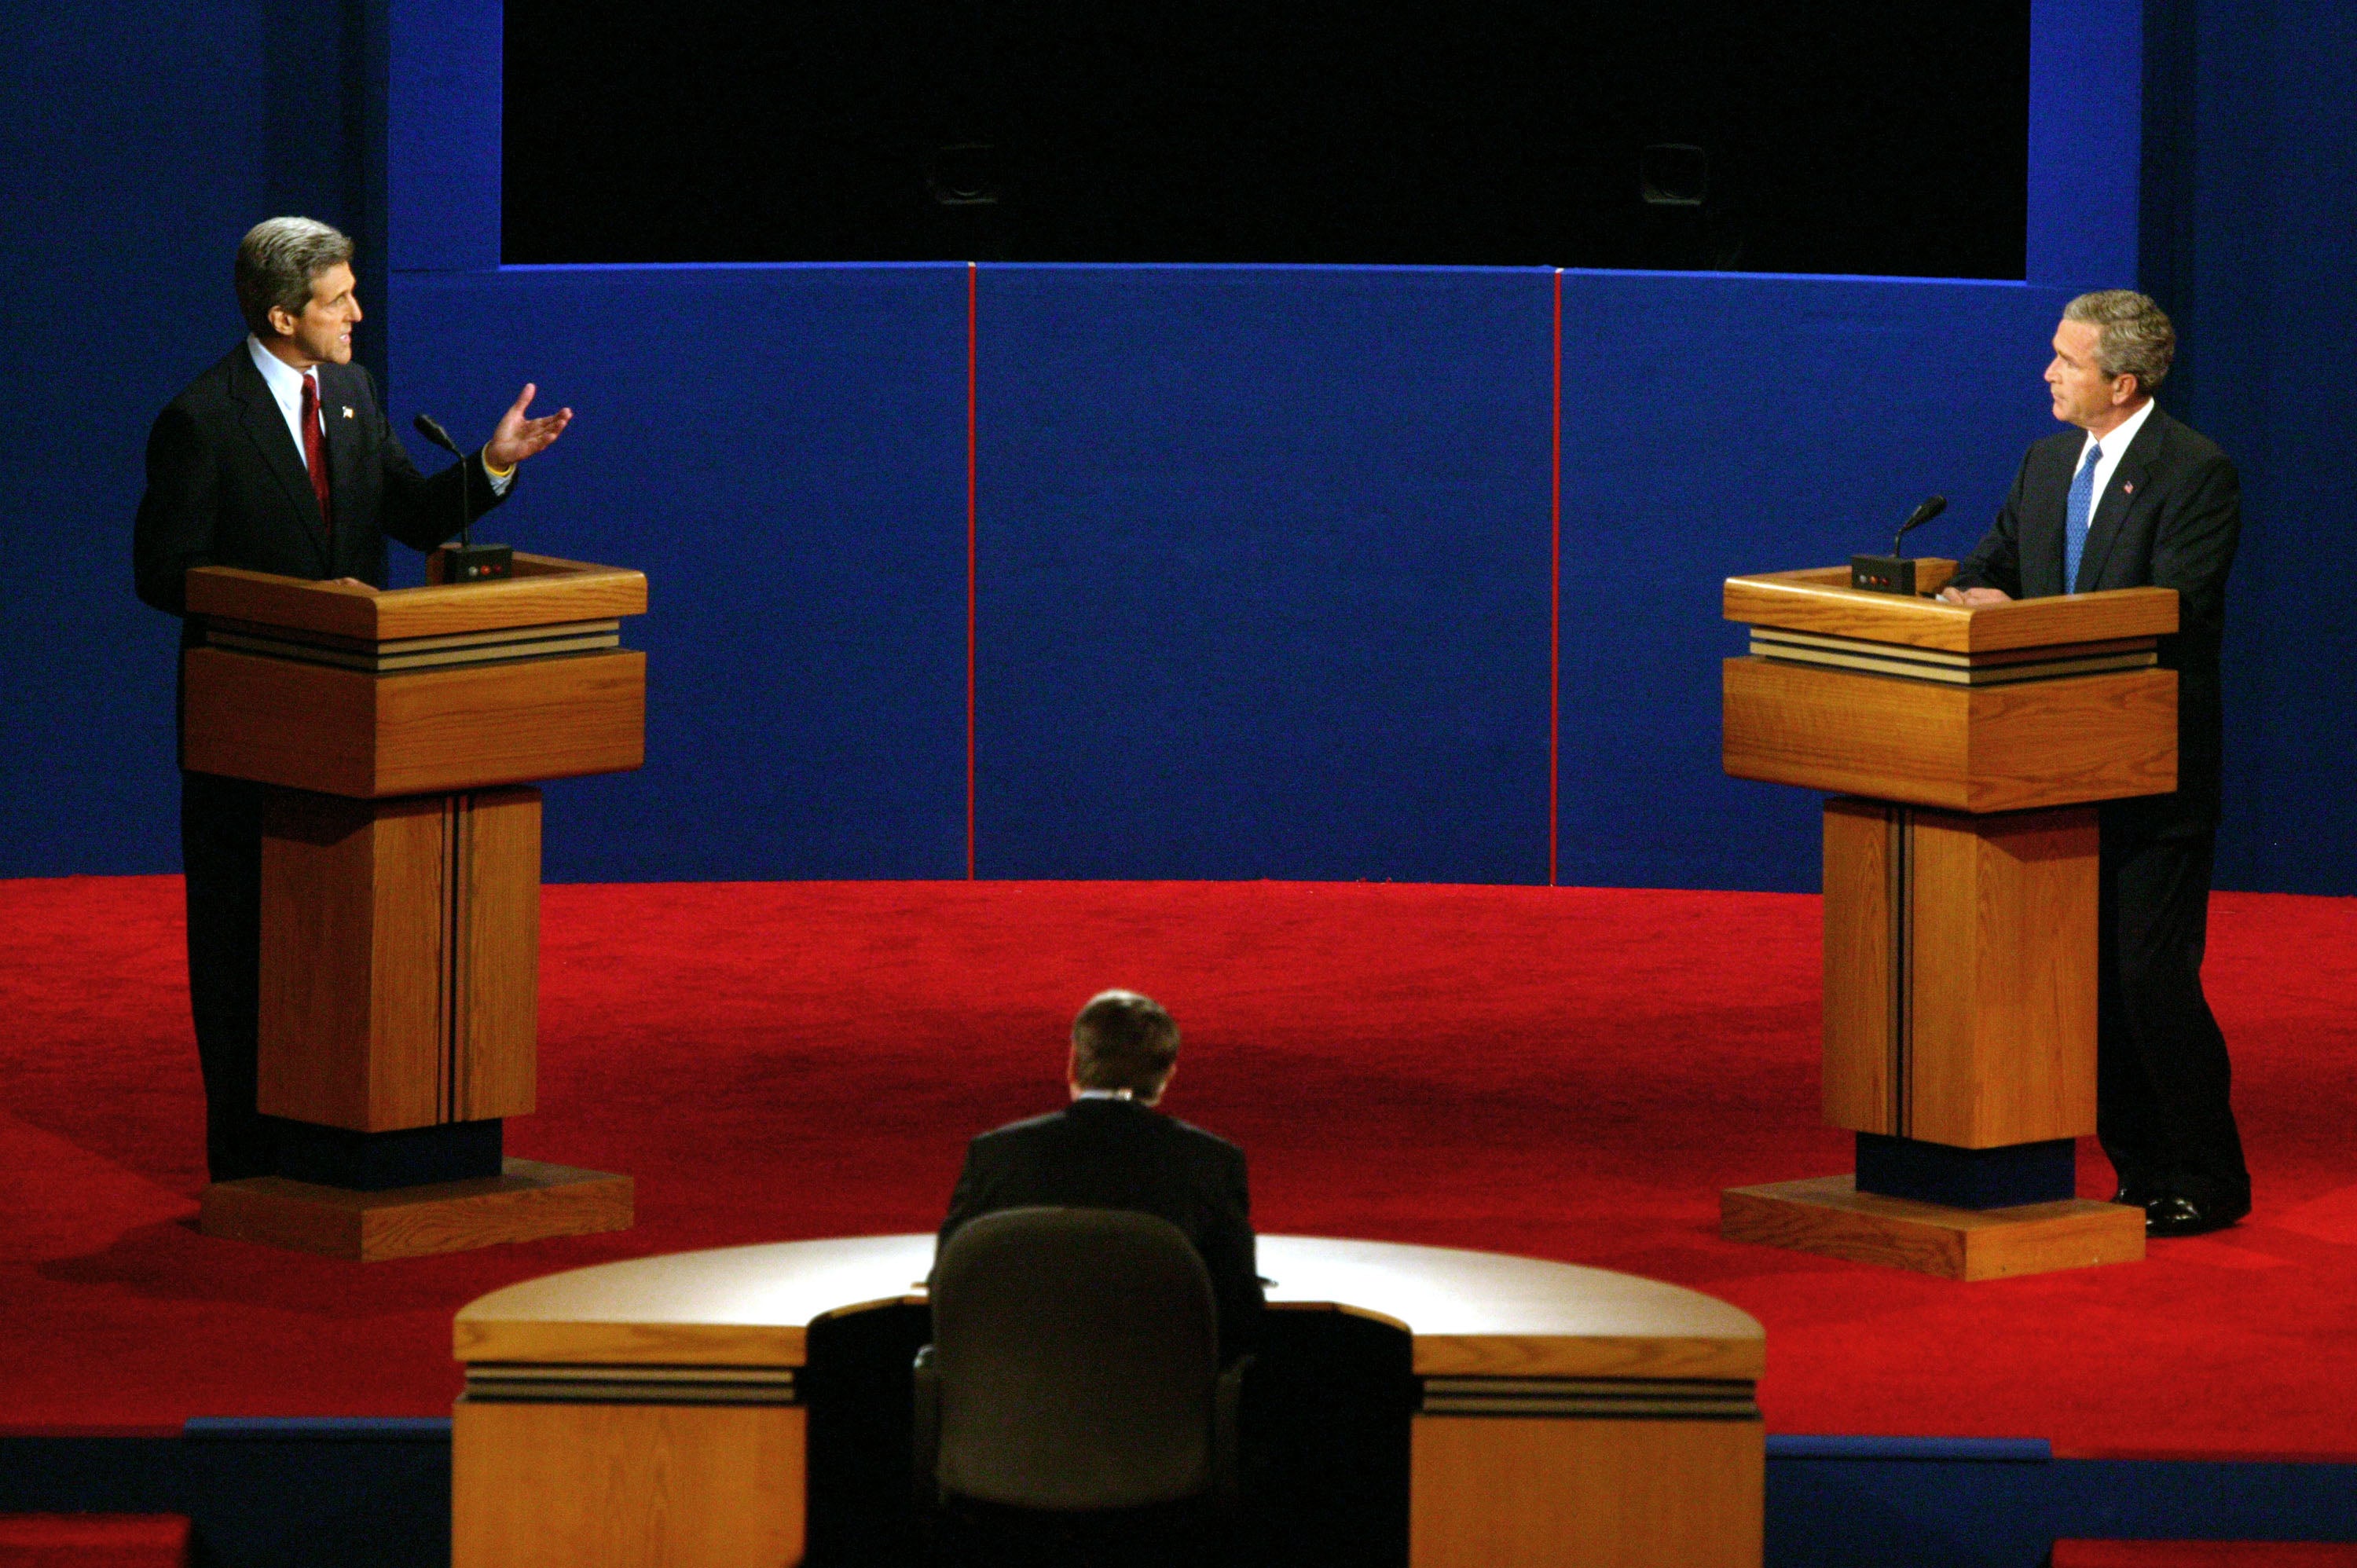 Kerry and Bush debate at the University of Miami on September 30, 2004 in Coral Gables, Florida